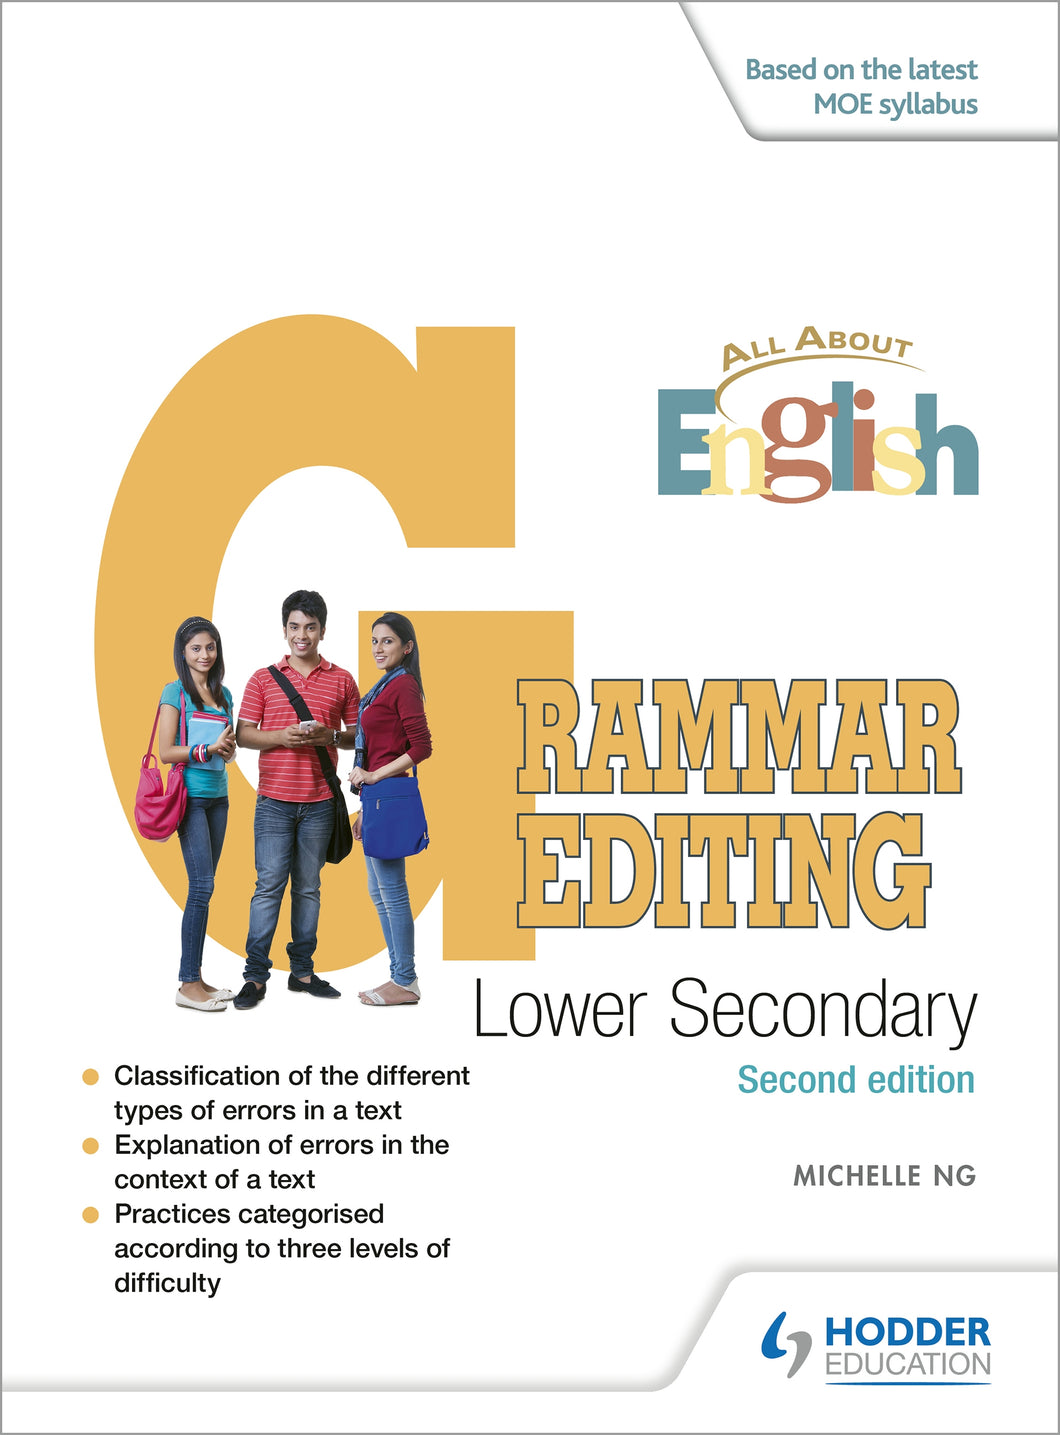 KRSS - English Language - All About English Grammar Editing for Lower Sec. (Revised Edition) (G3)